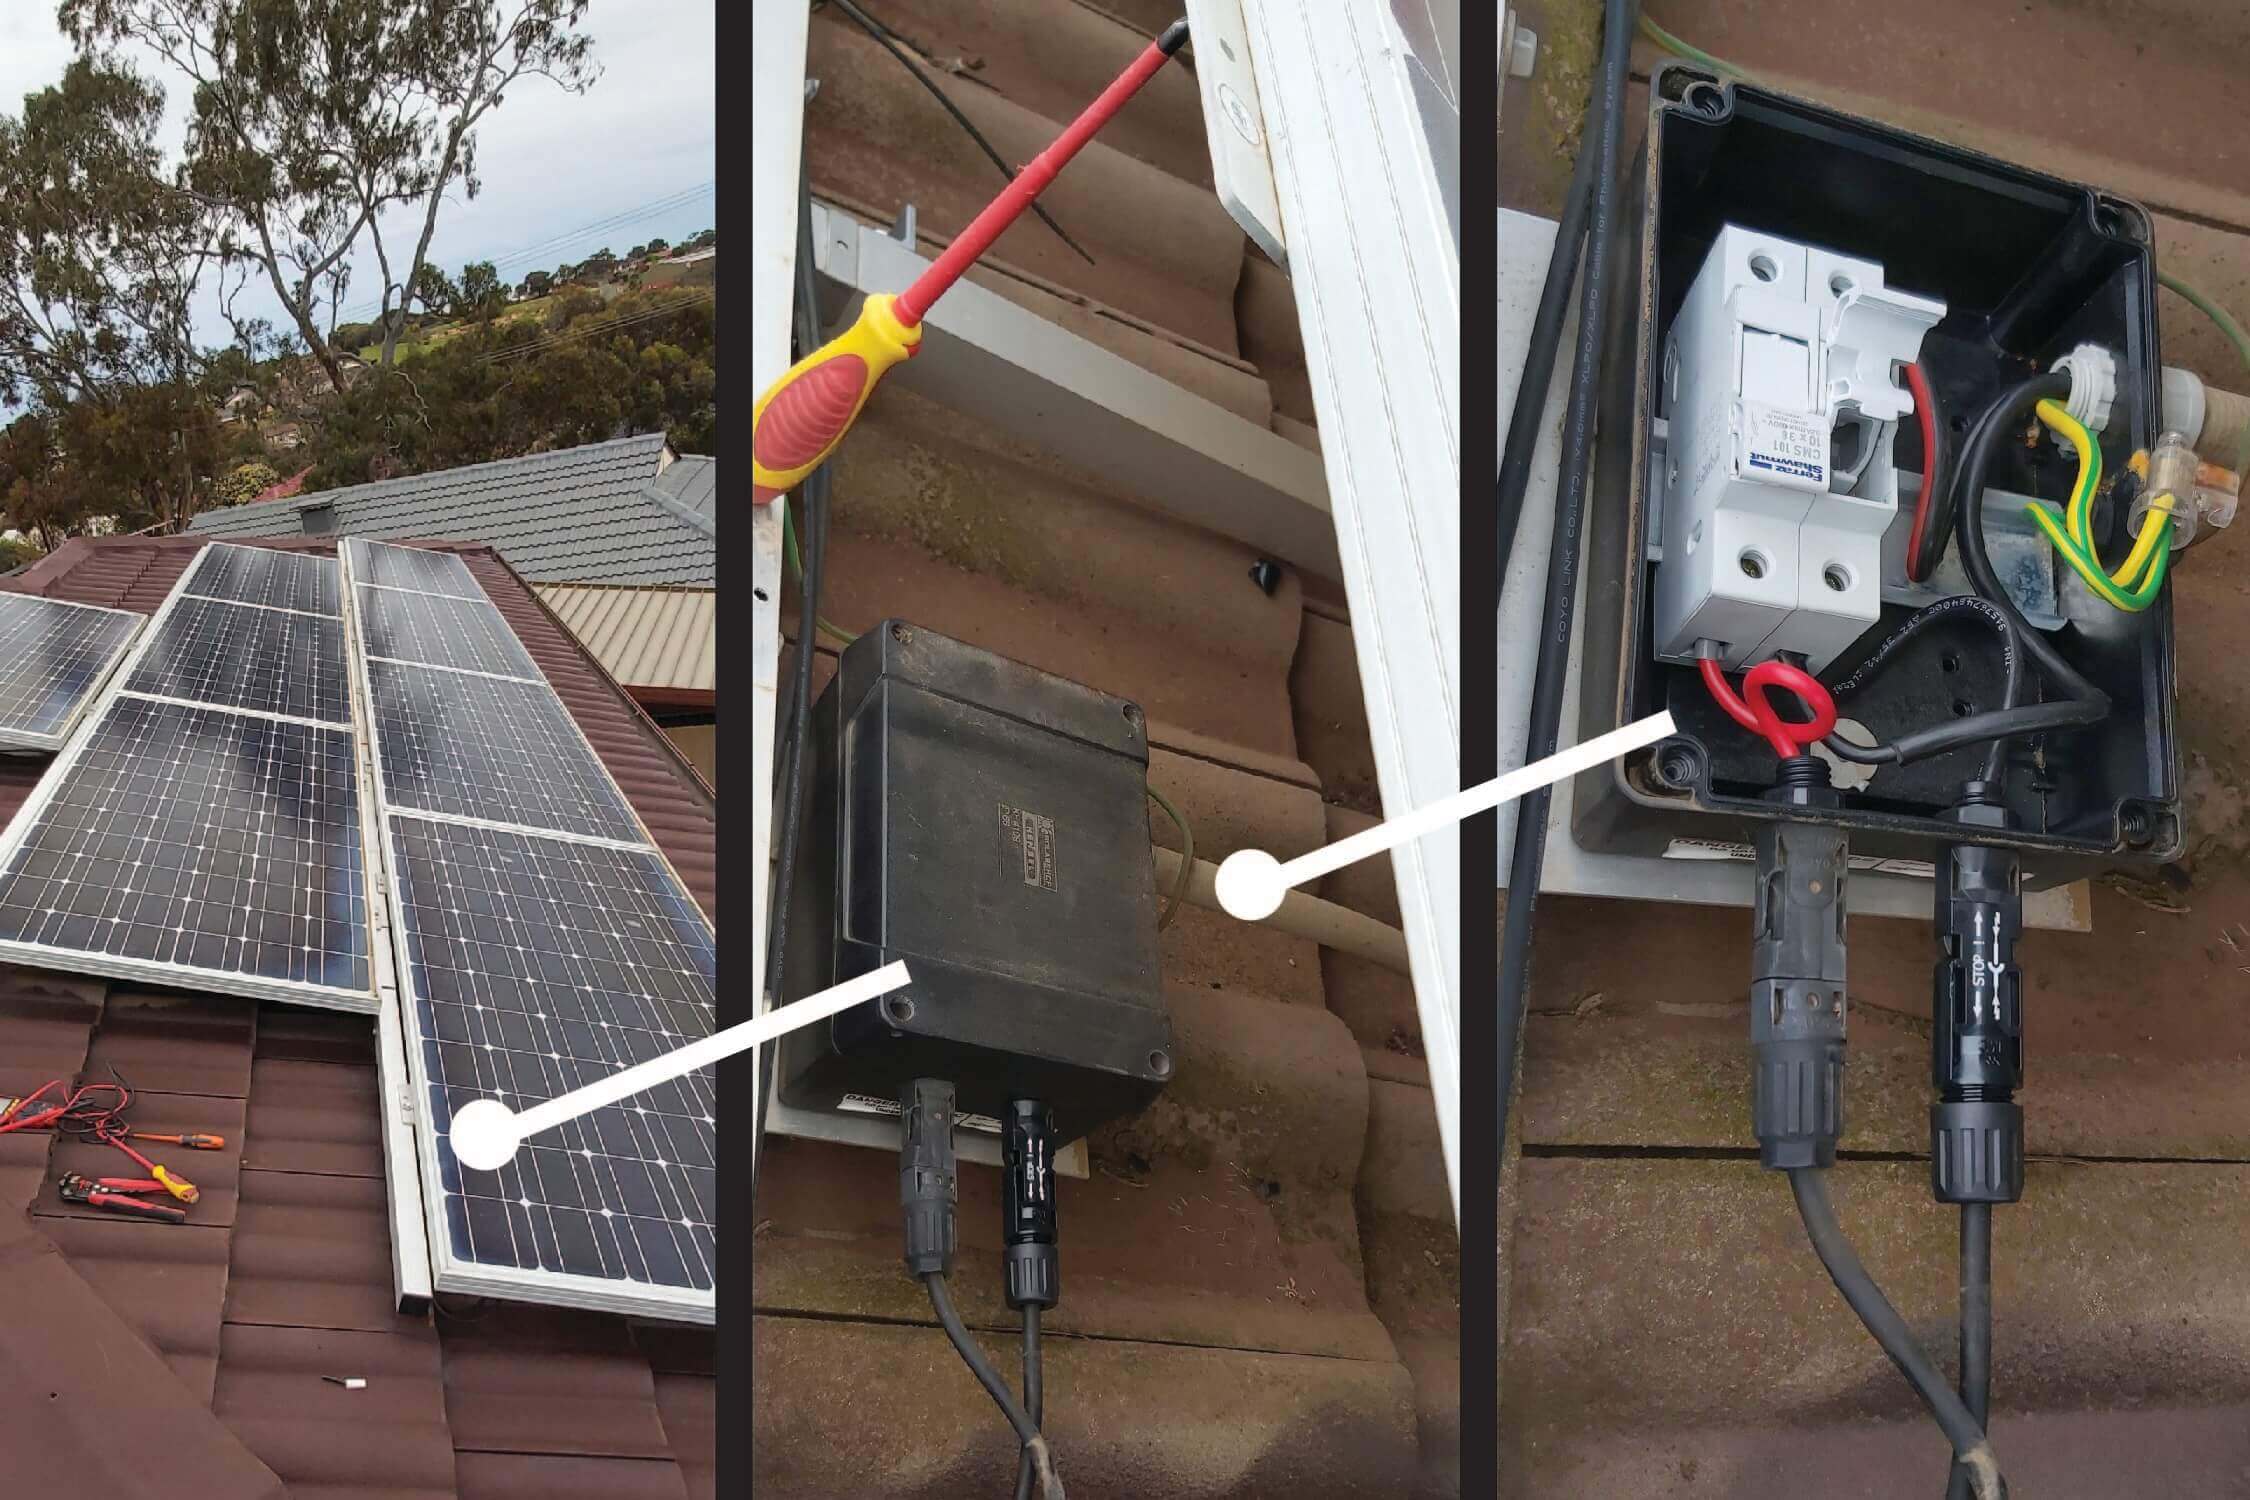 Solar panel stopped working